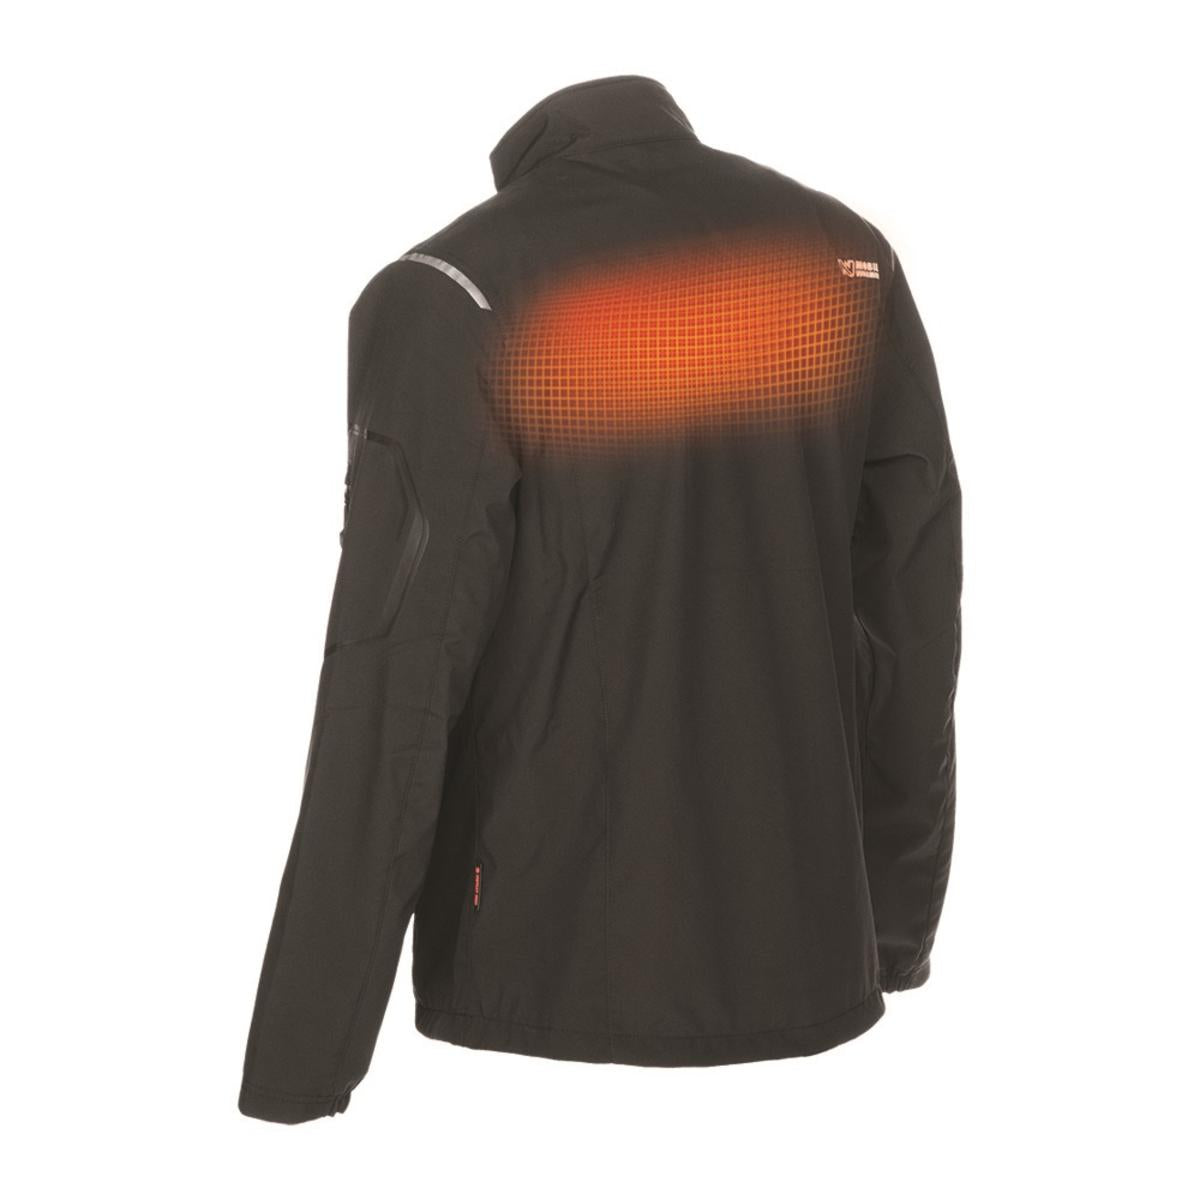 Mobile Warming 7.4V Men's Alpine Bluetooth Heated Jacket - Previous Generation